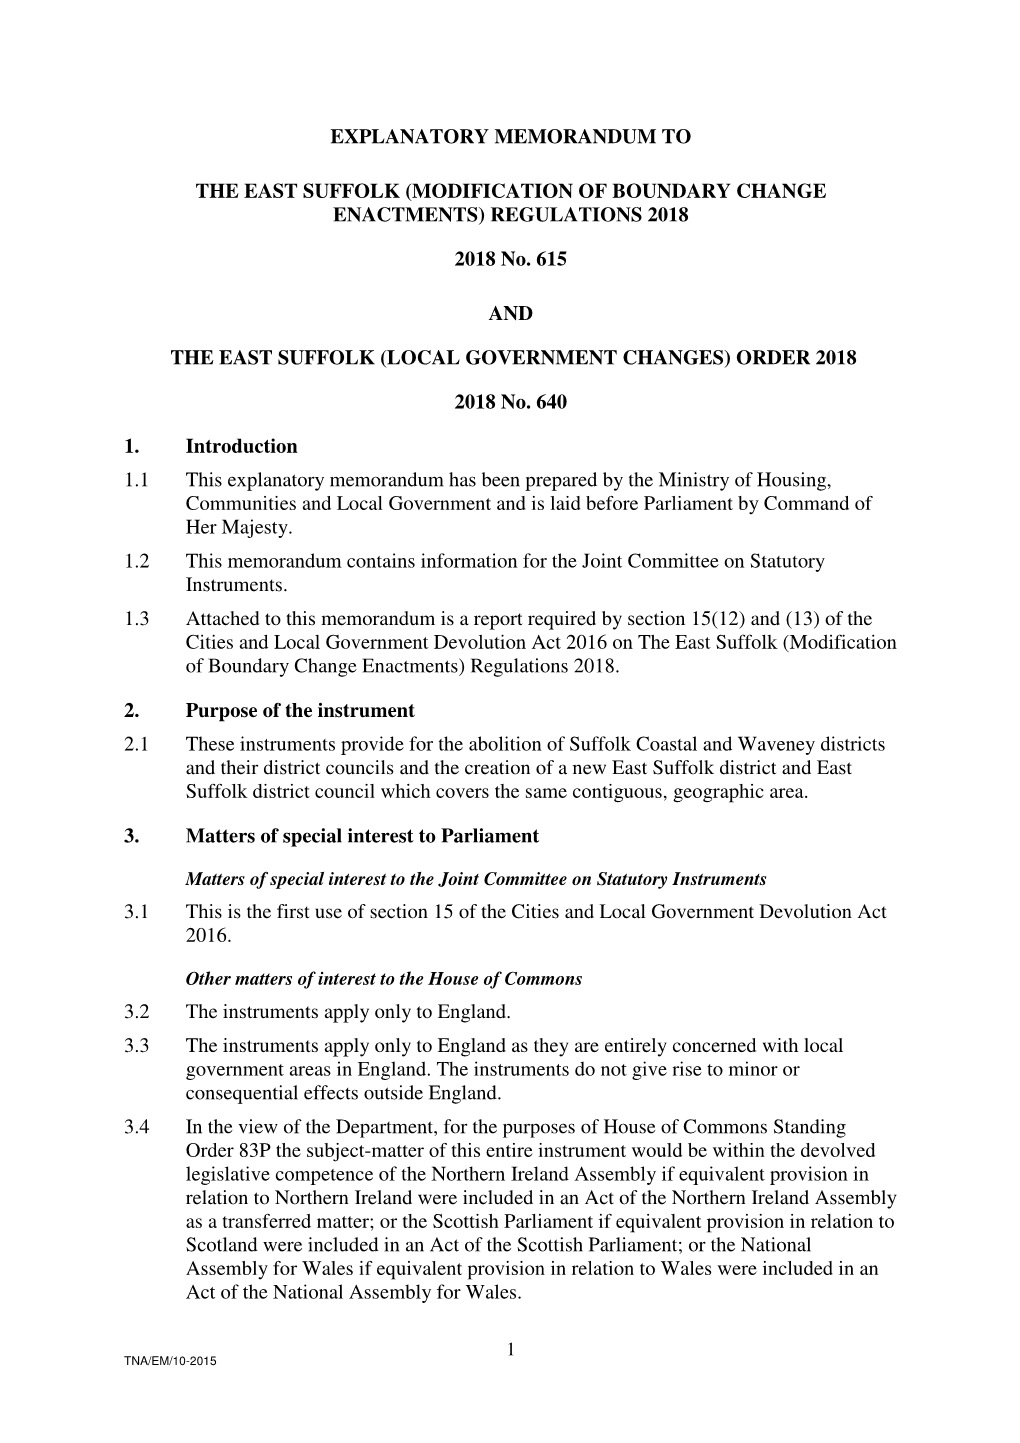 The East Suffolk (Modification of Boundary Change Enactments) Regulations 2018